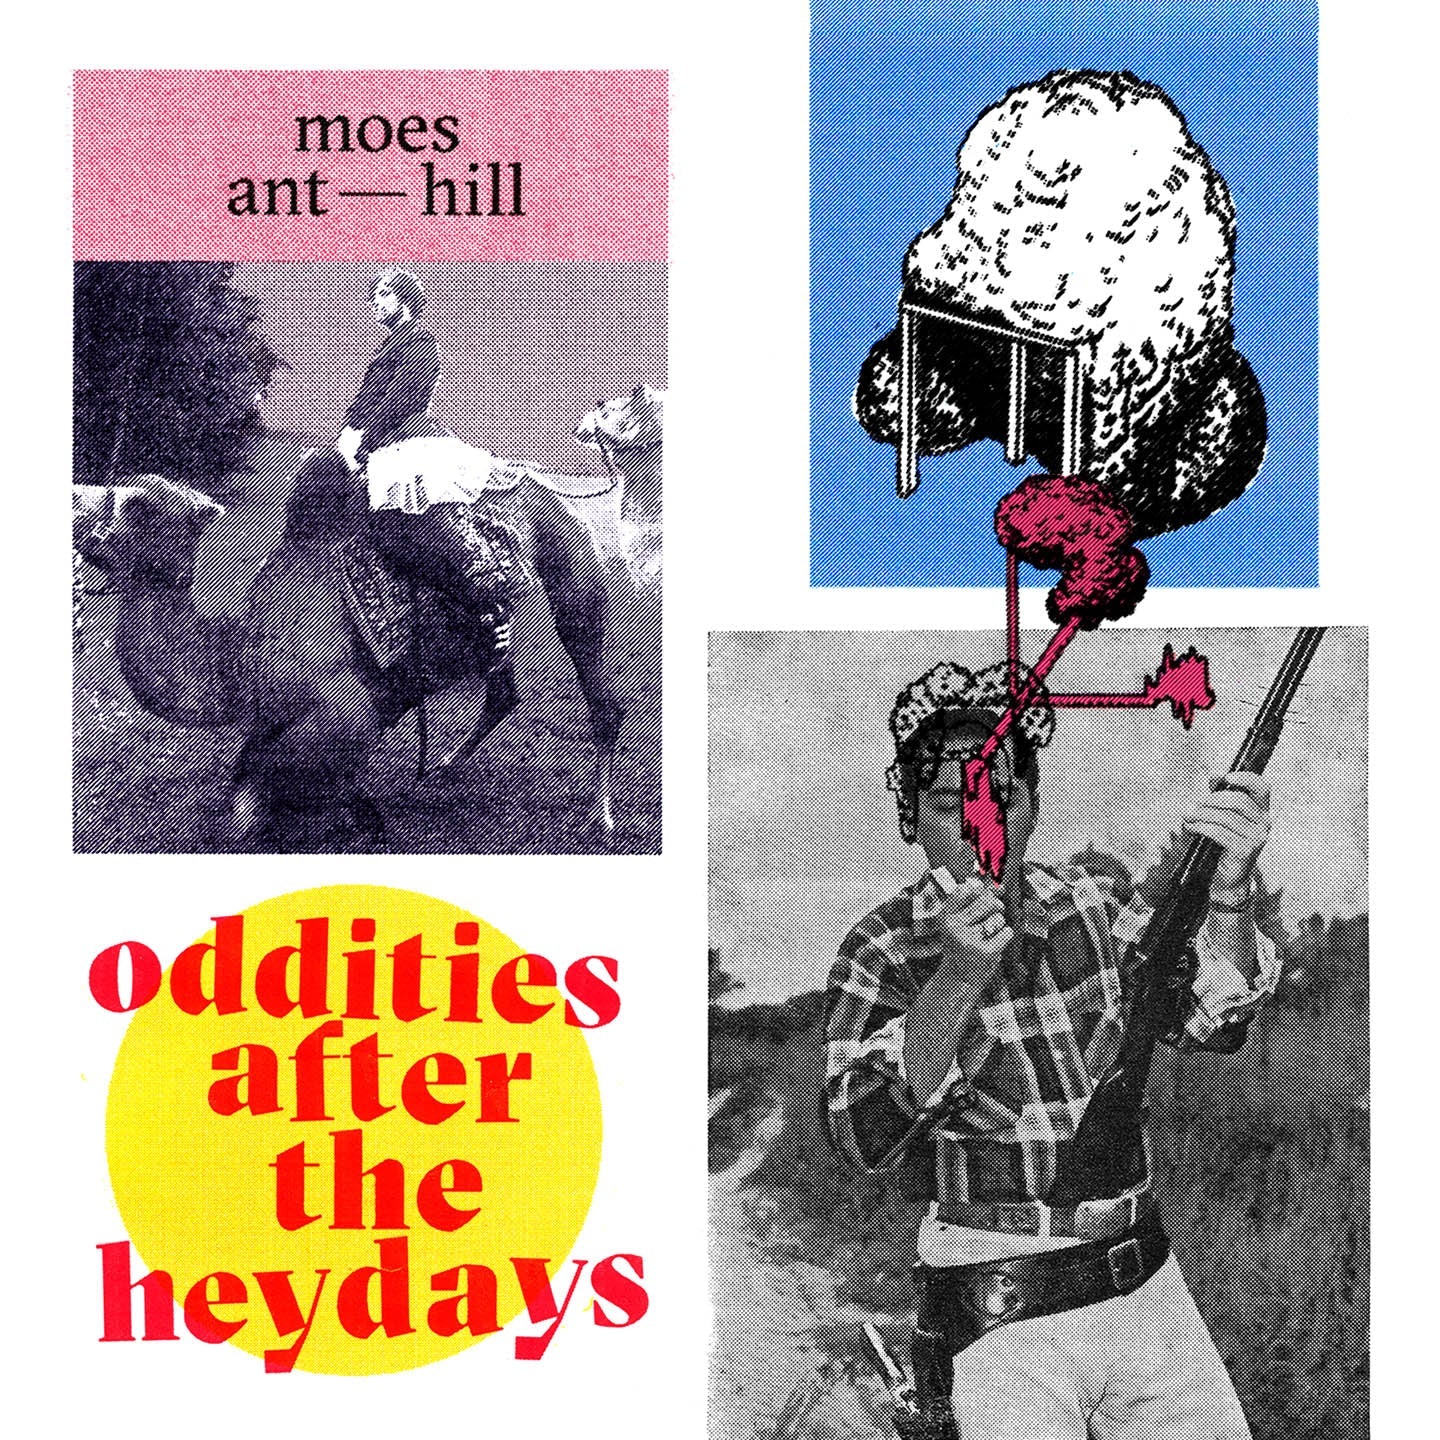 Oddities after the Heydays